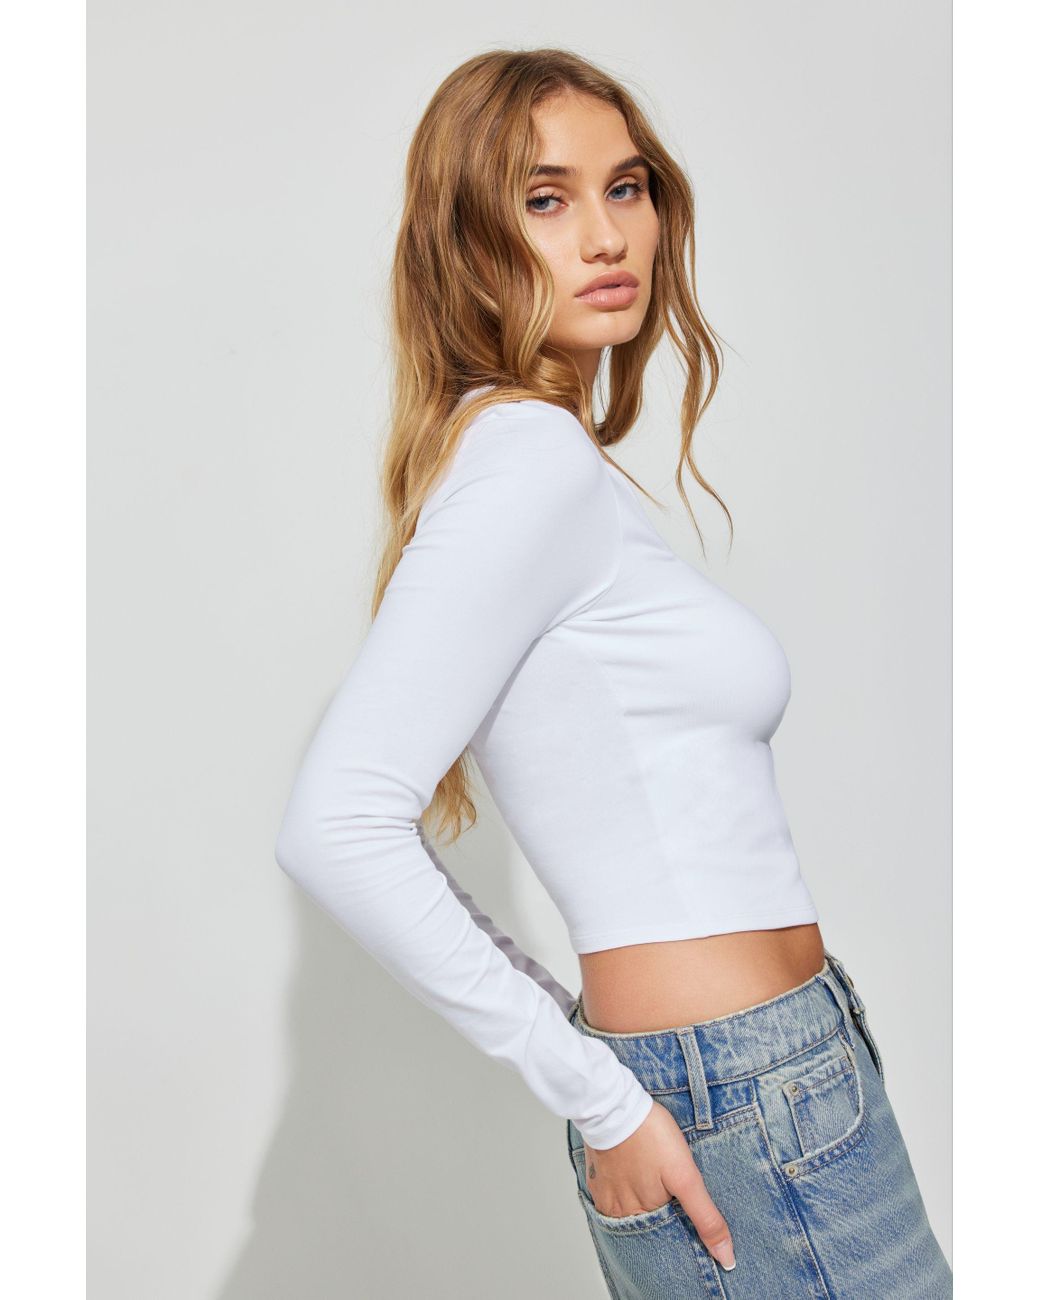 Garage Portia Square Neck Long Sleeve Top in White